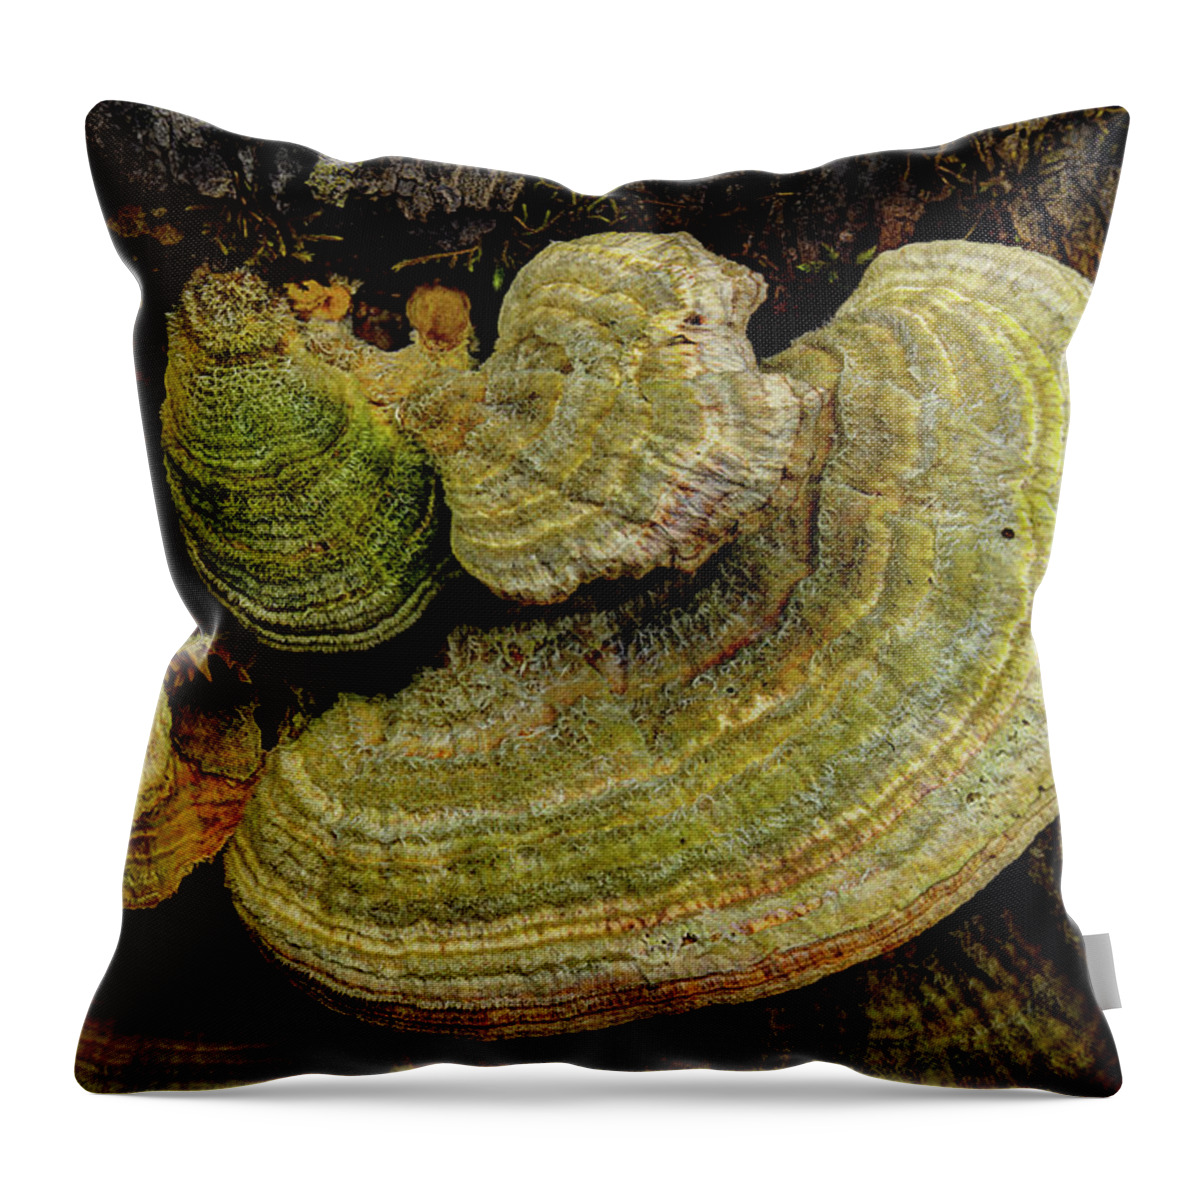 Fungus Throw Pillow featuring the photograph Fungus On The Log by Mike Eingle